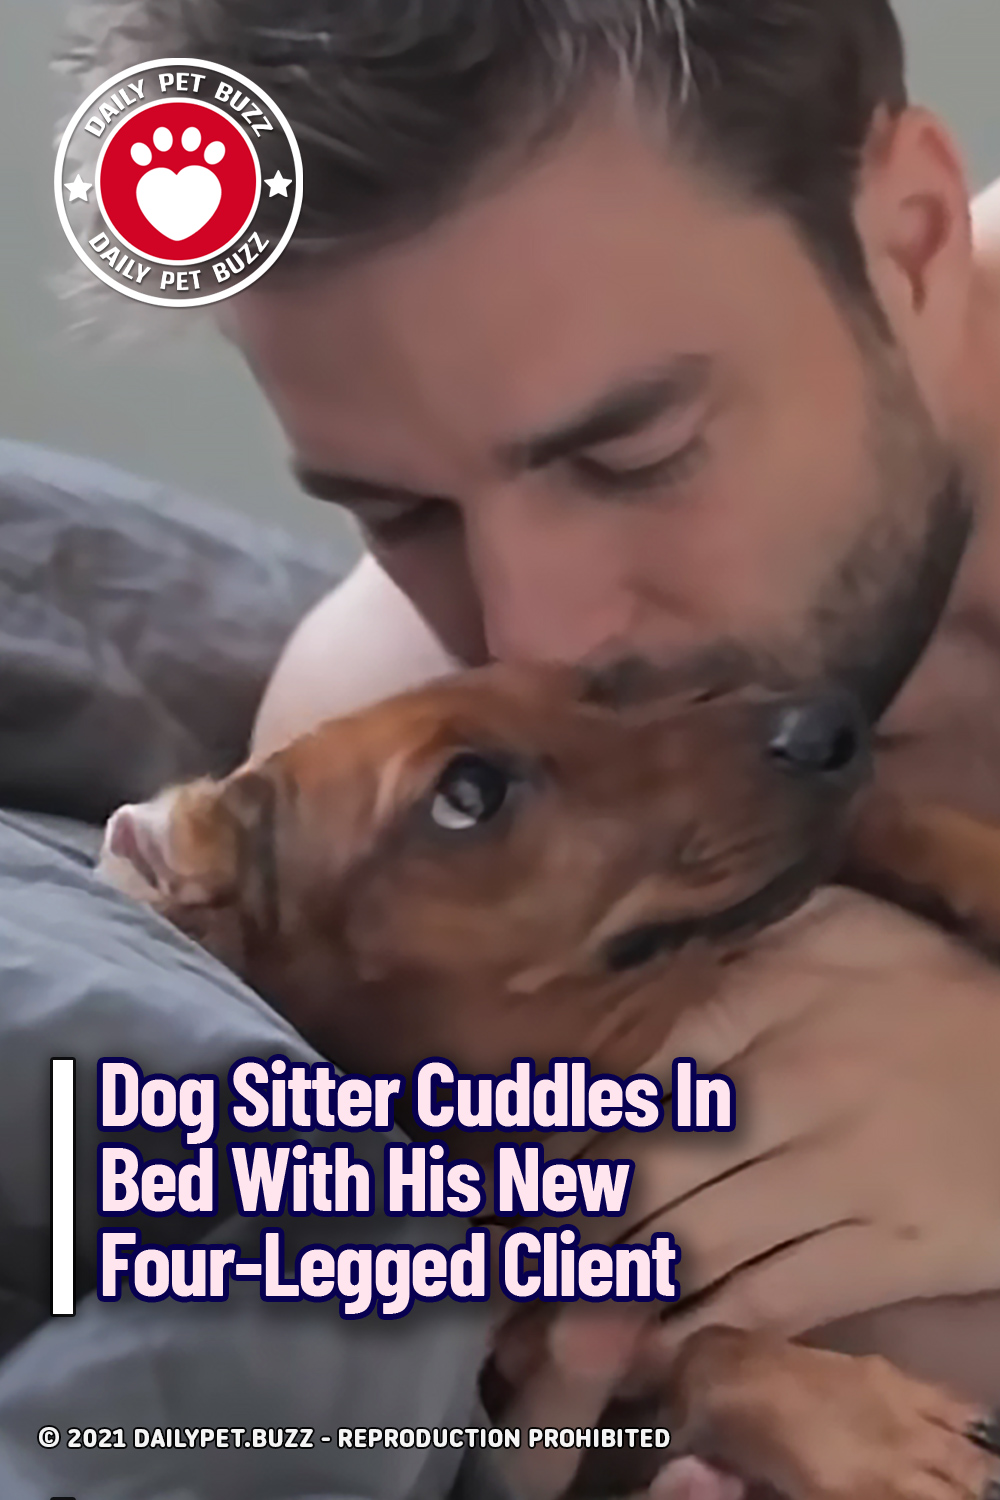 Dog Sitter Cuddles In Bed With His New Four-Legged Client